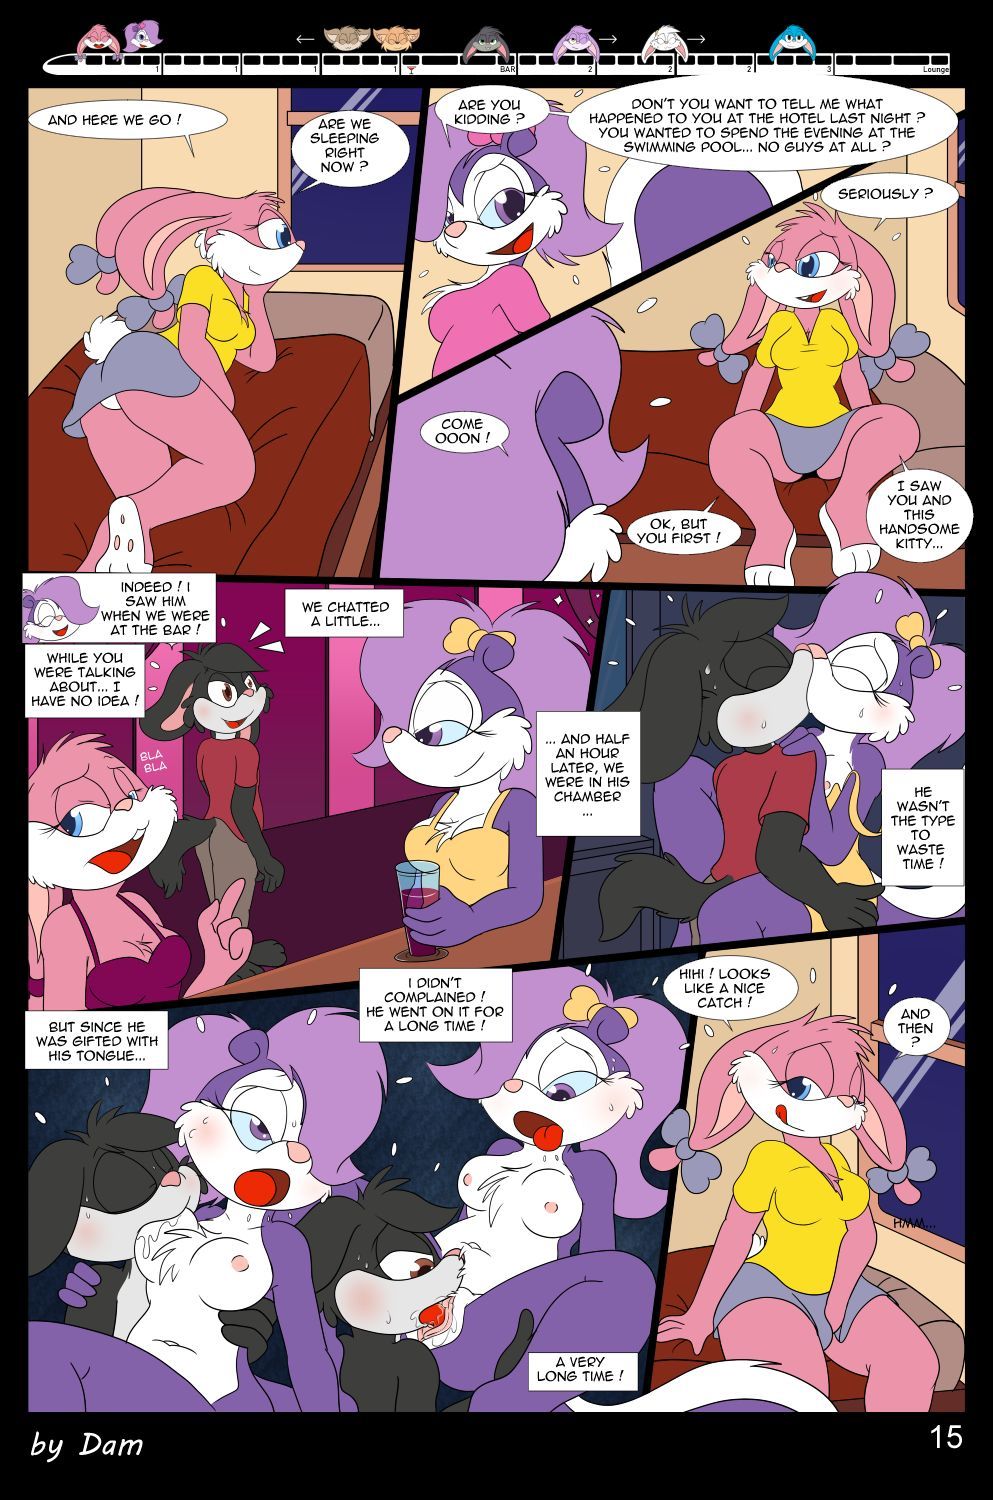 [Dam] Toons on a train [Ongoing] 15